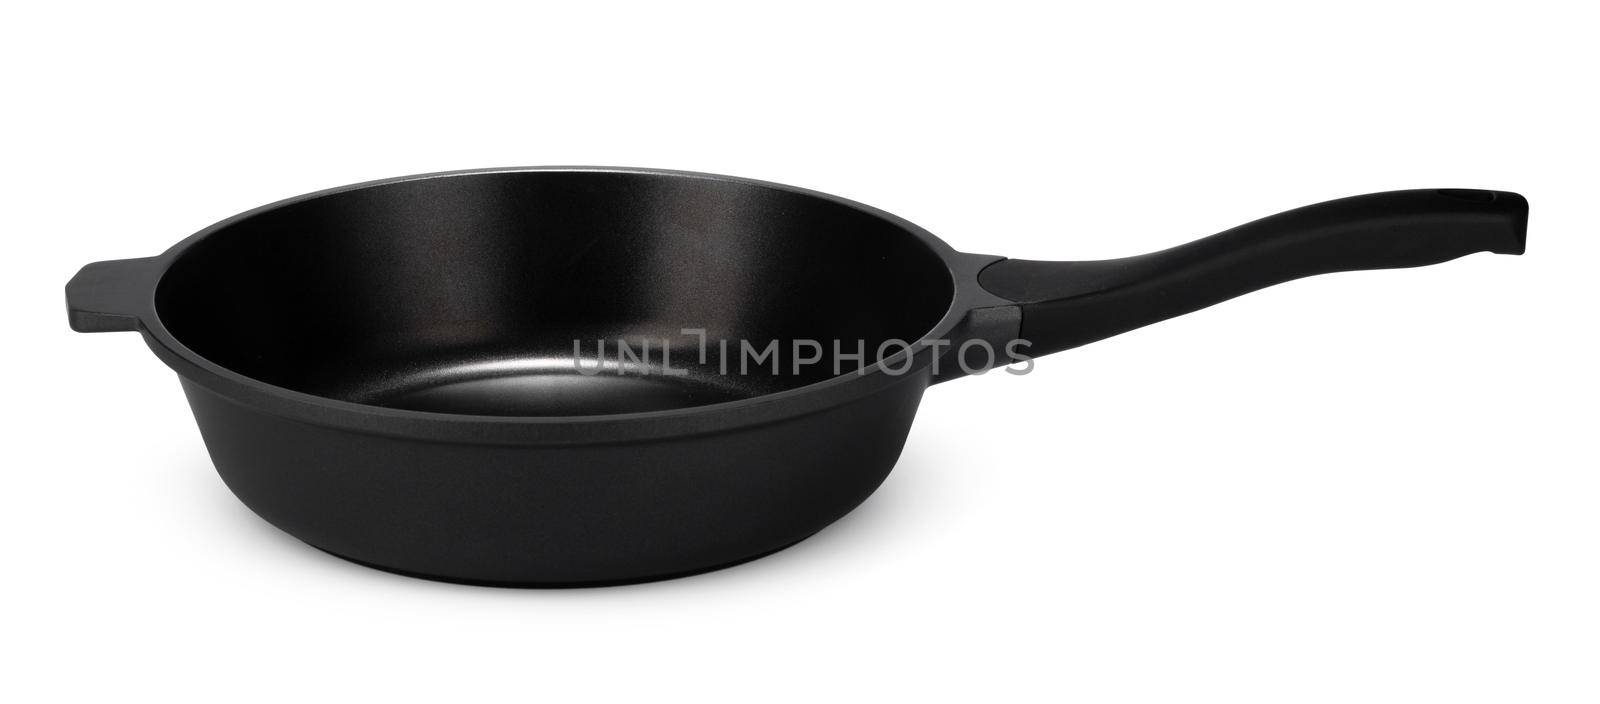 New black clean frying pan isolated on white background